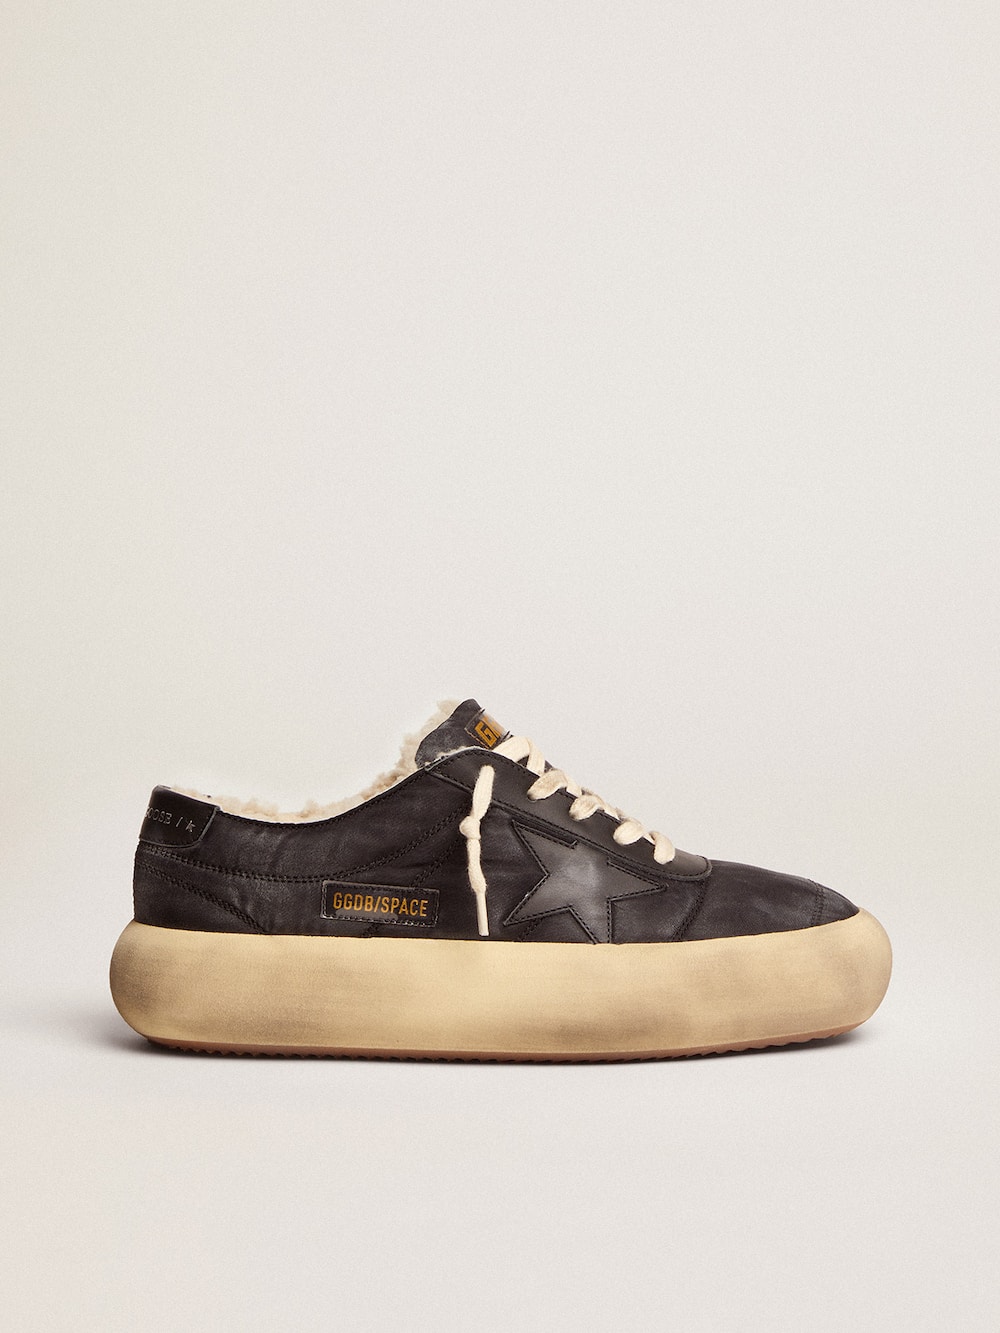 Golden Goose - Women's Space-Star shoes in quilted black nylon with shearling lining in 